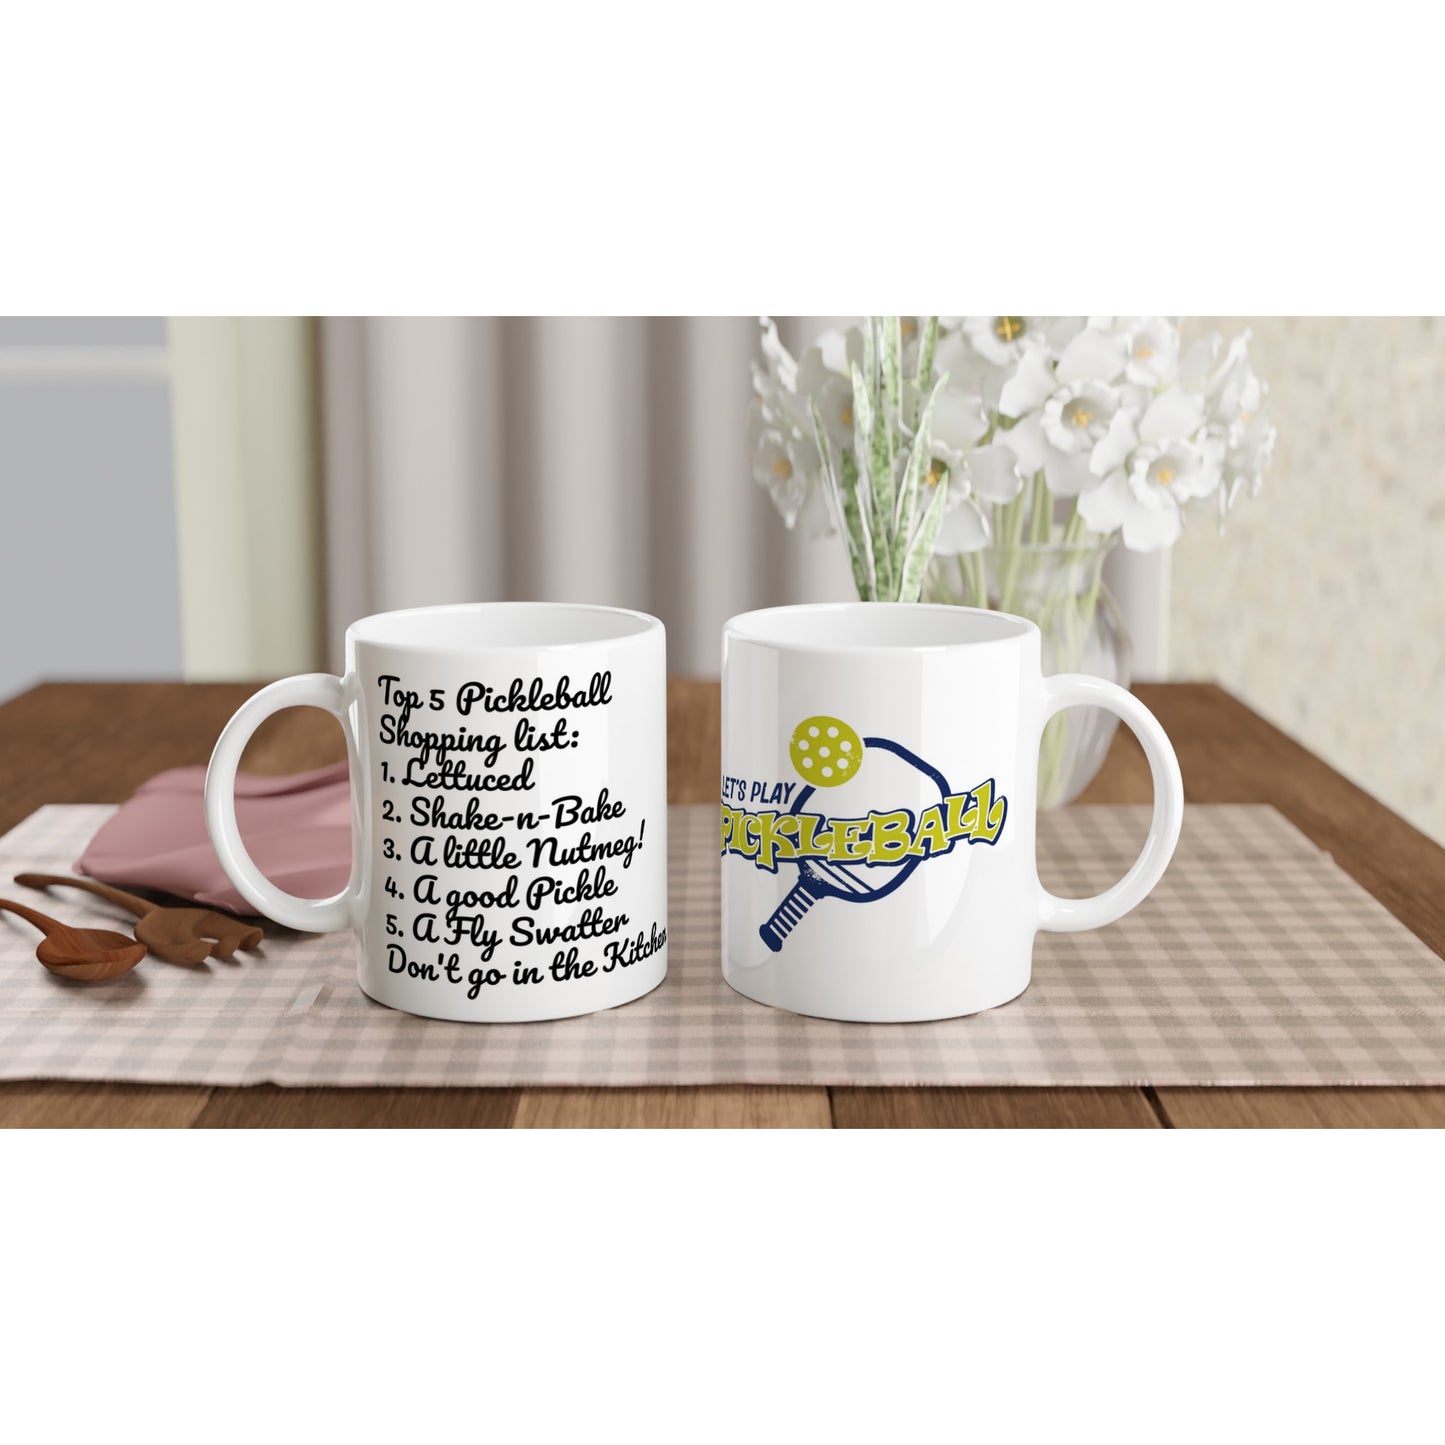 Two white ceramic 11oz mugs with original motto Top 5 Pickleball Shopping list lettuce, Shake-n-bake, Nutmeg, Pickle, a Fly Swatter Don’t go in the kitchen front side and Let's Play PickleBall logo on back coffee mugs are dishwasher and microwave safe from WhatYa Say Apparel sitting on coffee table with green and white placemat.